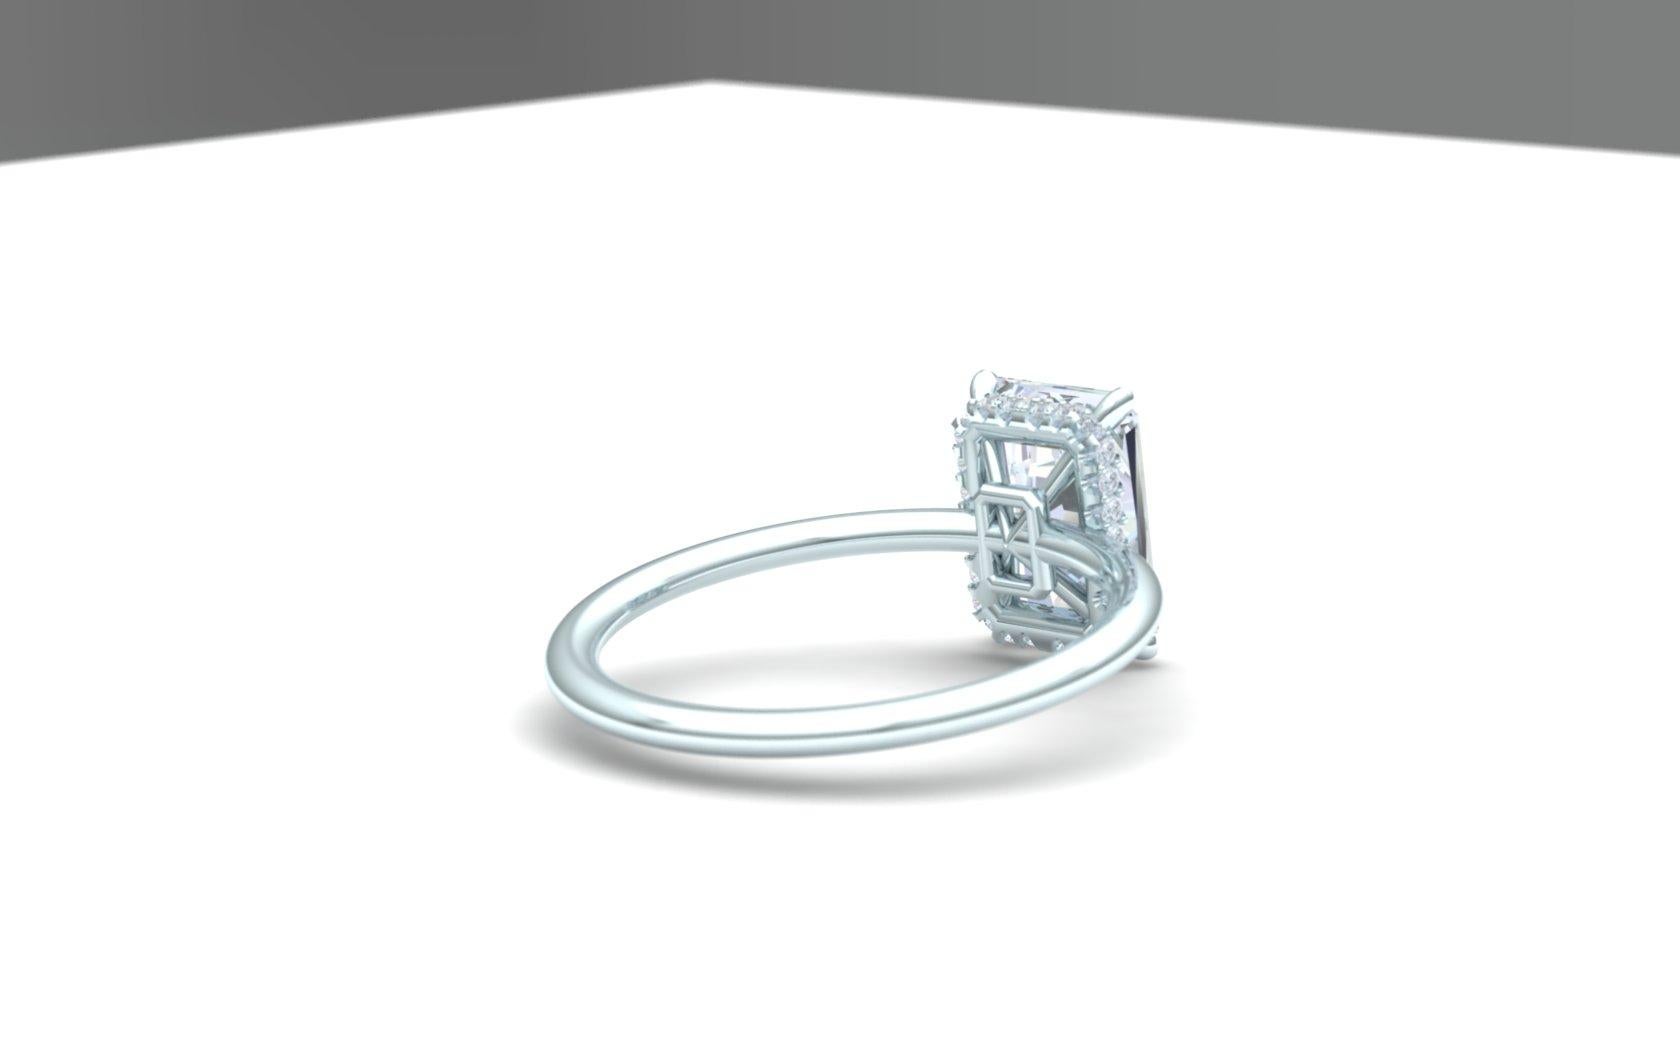 This GIA Certified Radiant Cut Diamond is set in a classic and clean platinum setting. The center stone is 2 carats and has a color and clarity of F-VS2. The diamond is set in a platinum four prong head and has a hidden halo below the center stone